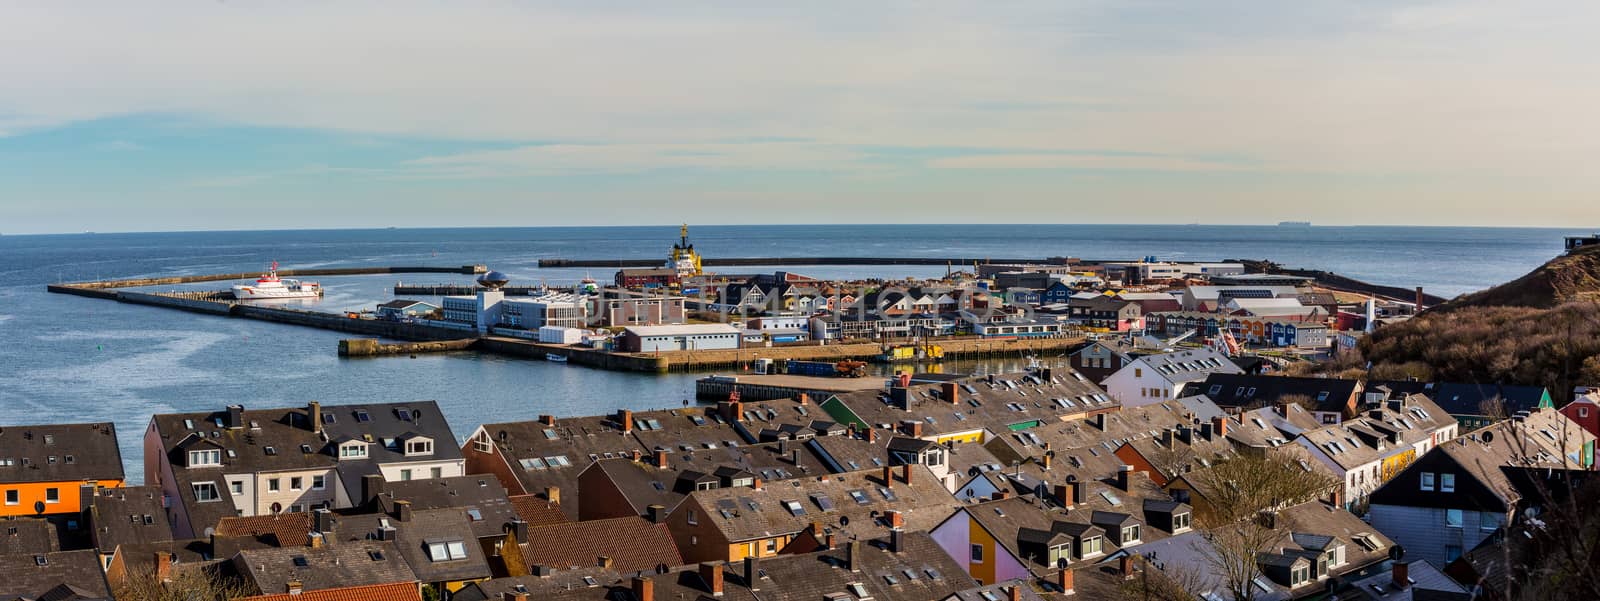 helgoland city from hill by artush